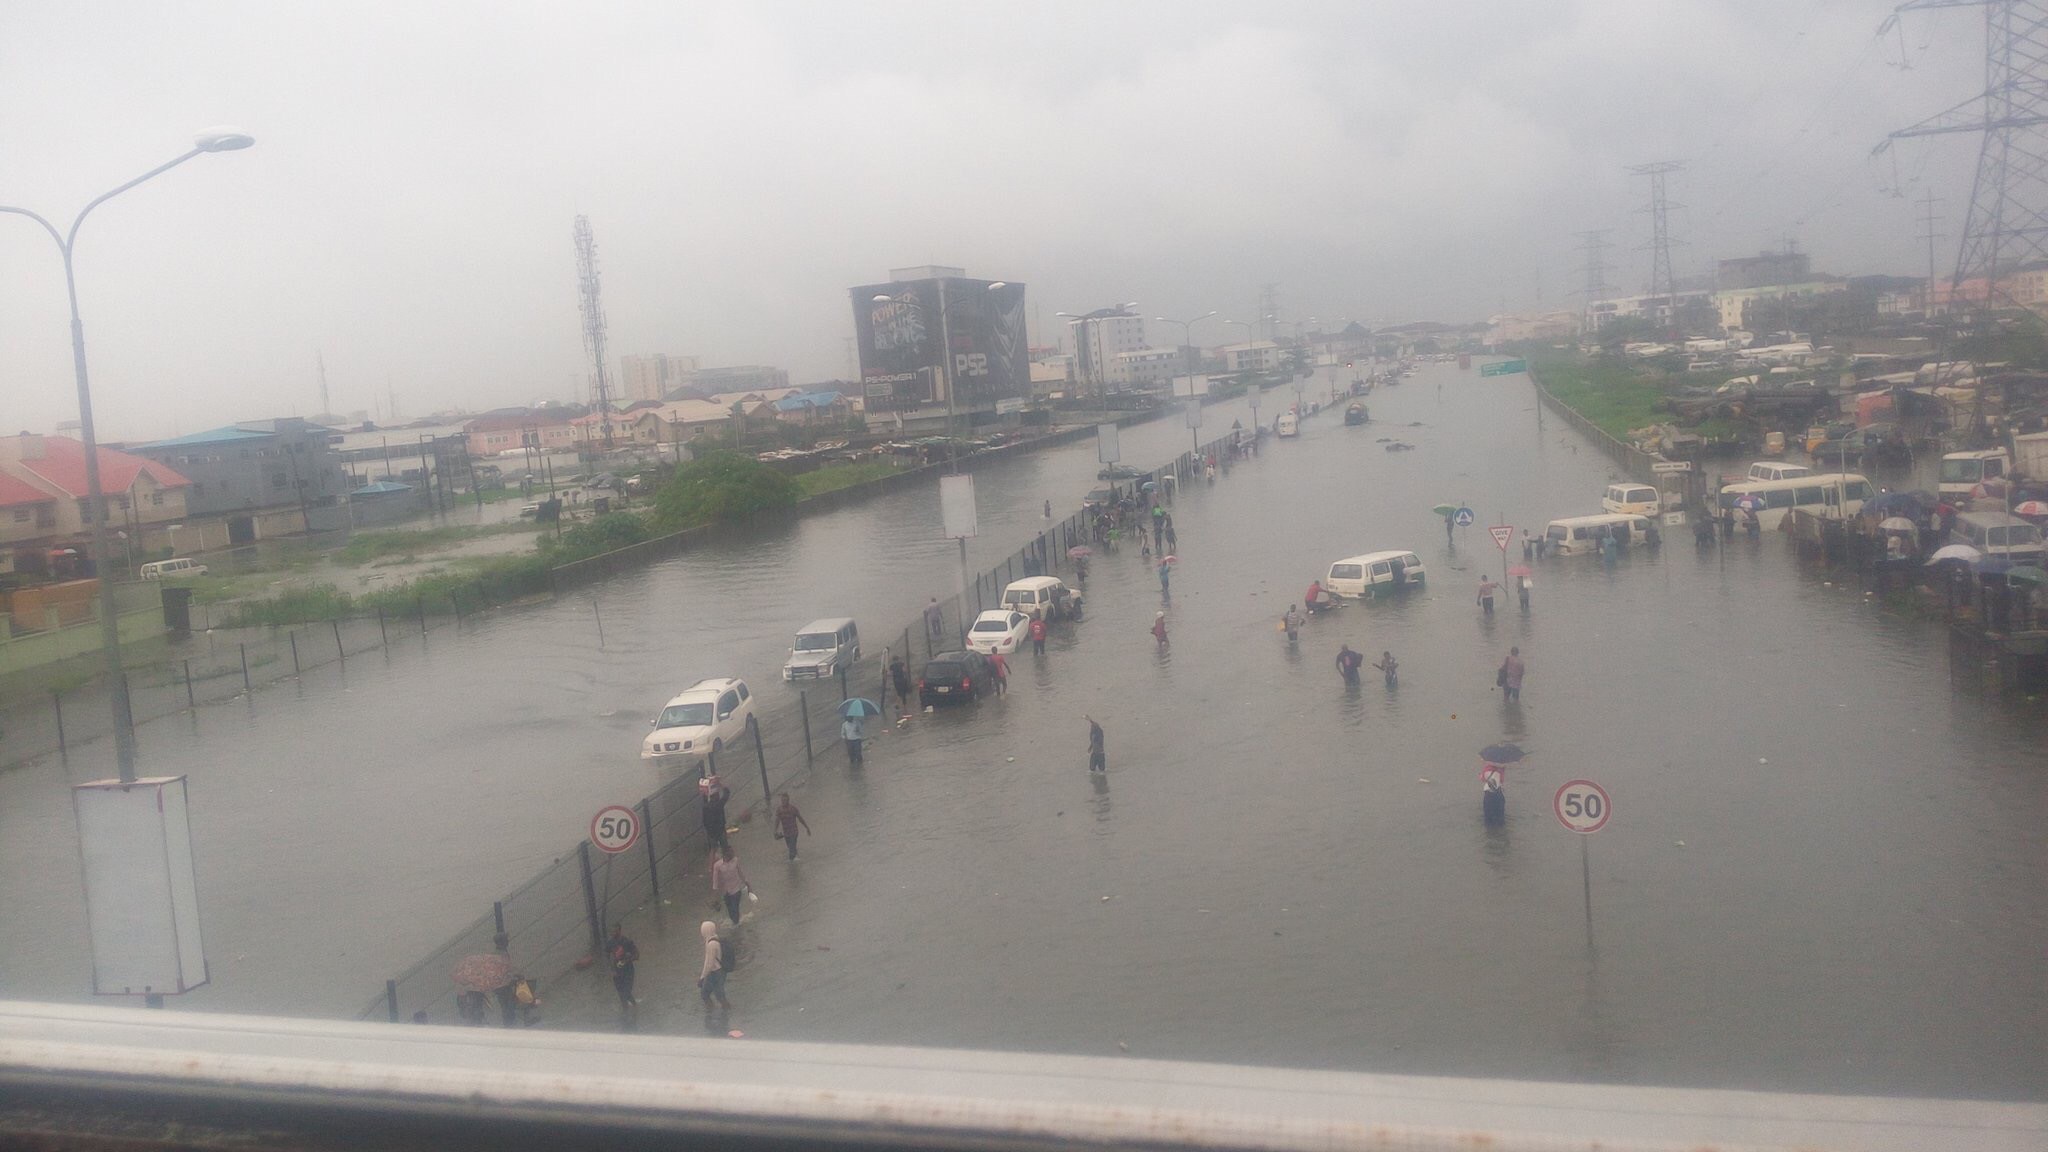 Ambode Pities with Flood Victims, Threatens Environmental Criminals